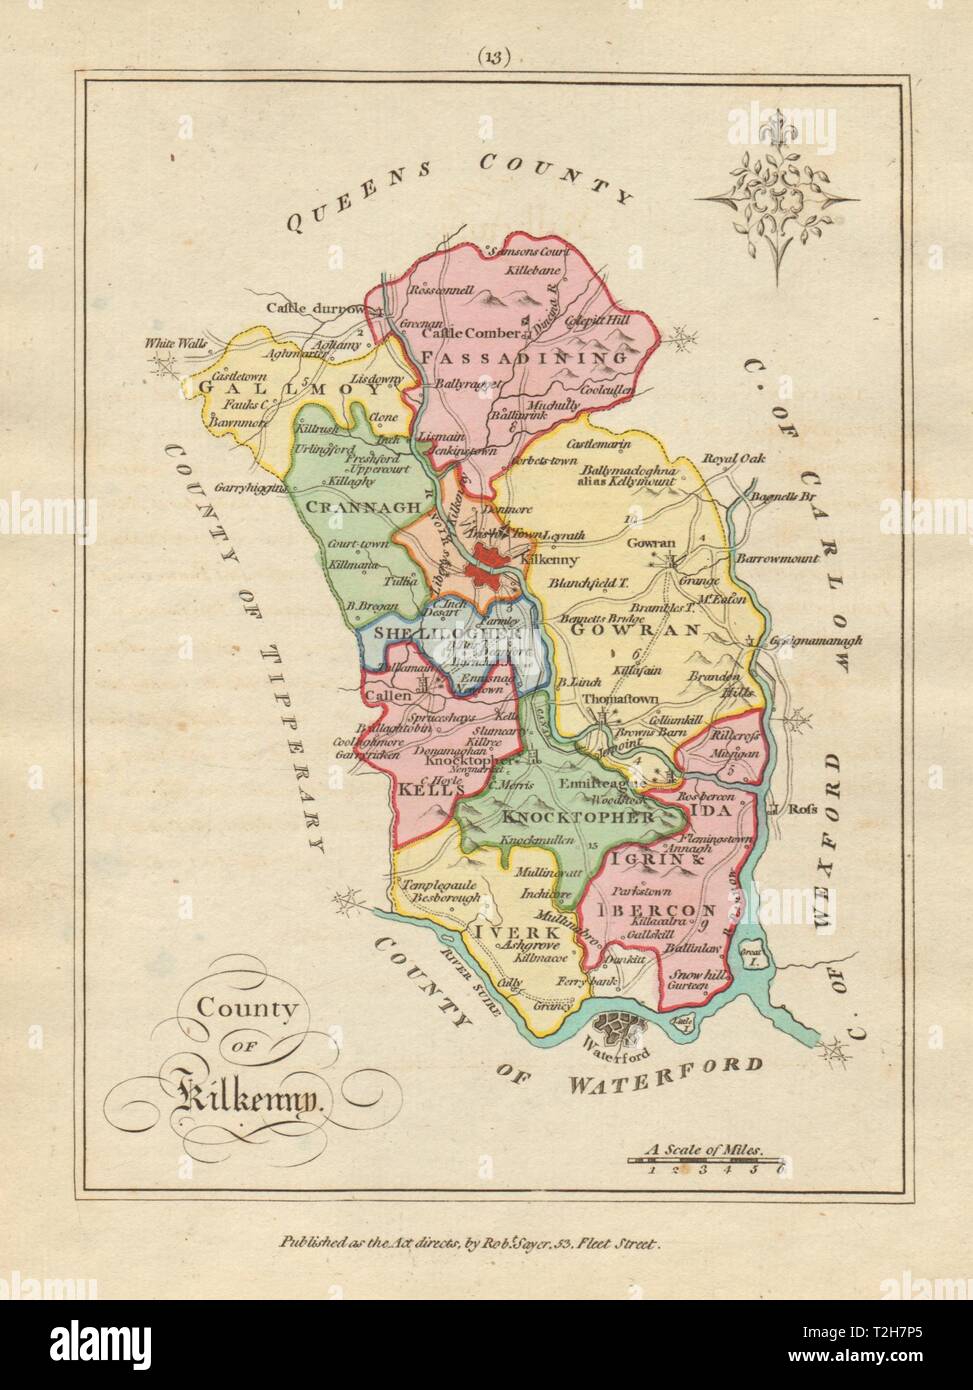 County of Kilkenny, Leinster. Antique copperplate map by Scalé / Sayer 1788 Stock Photo